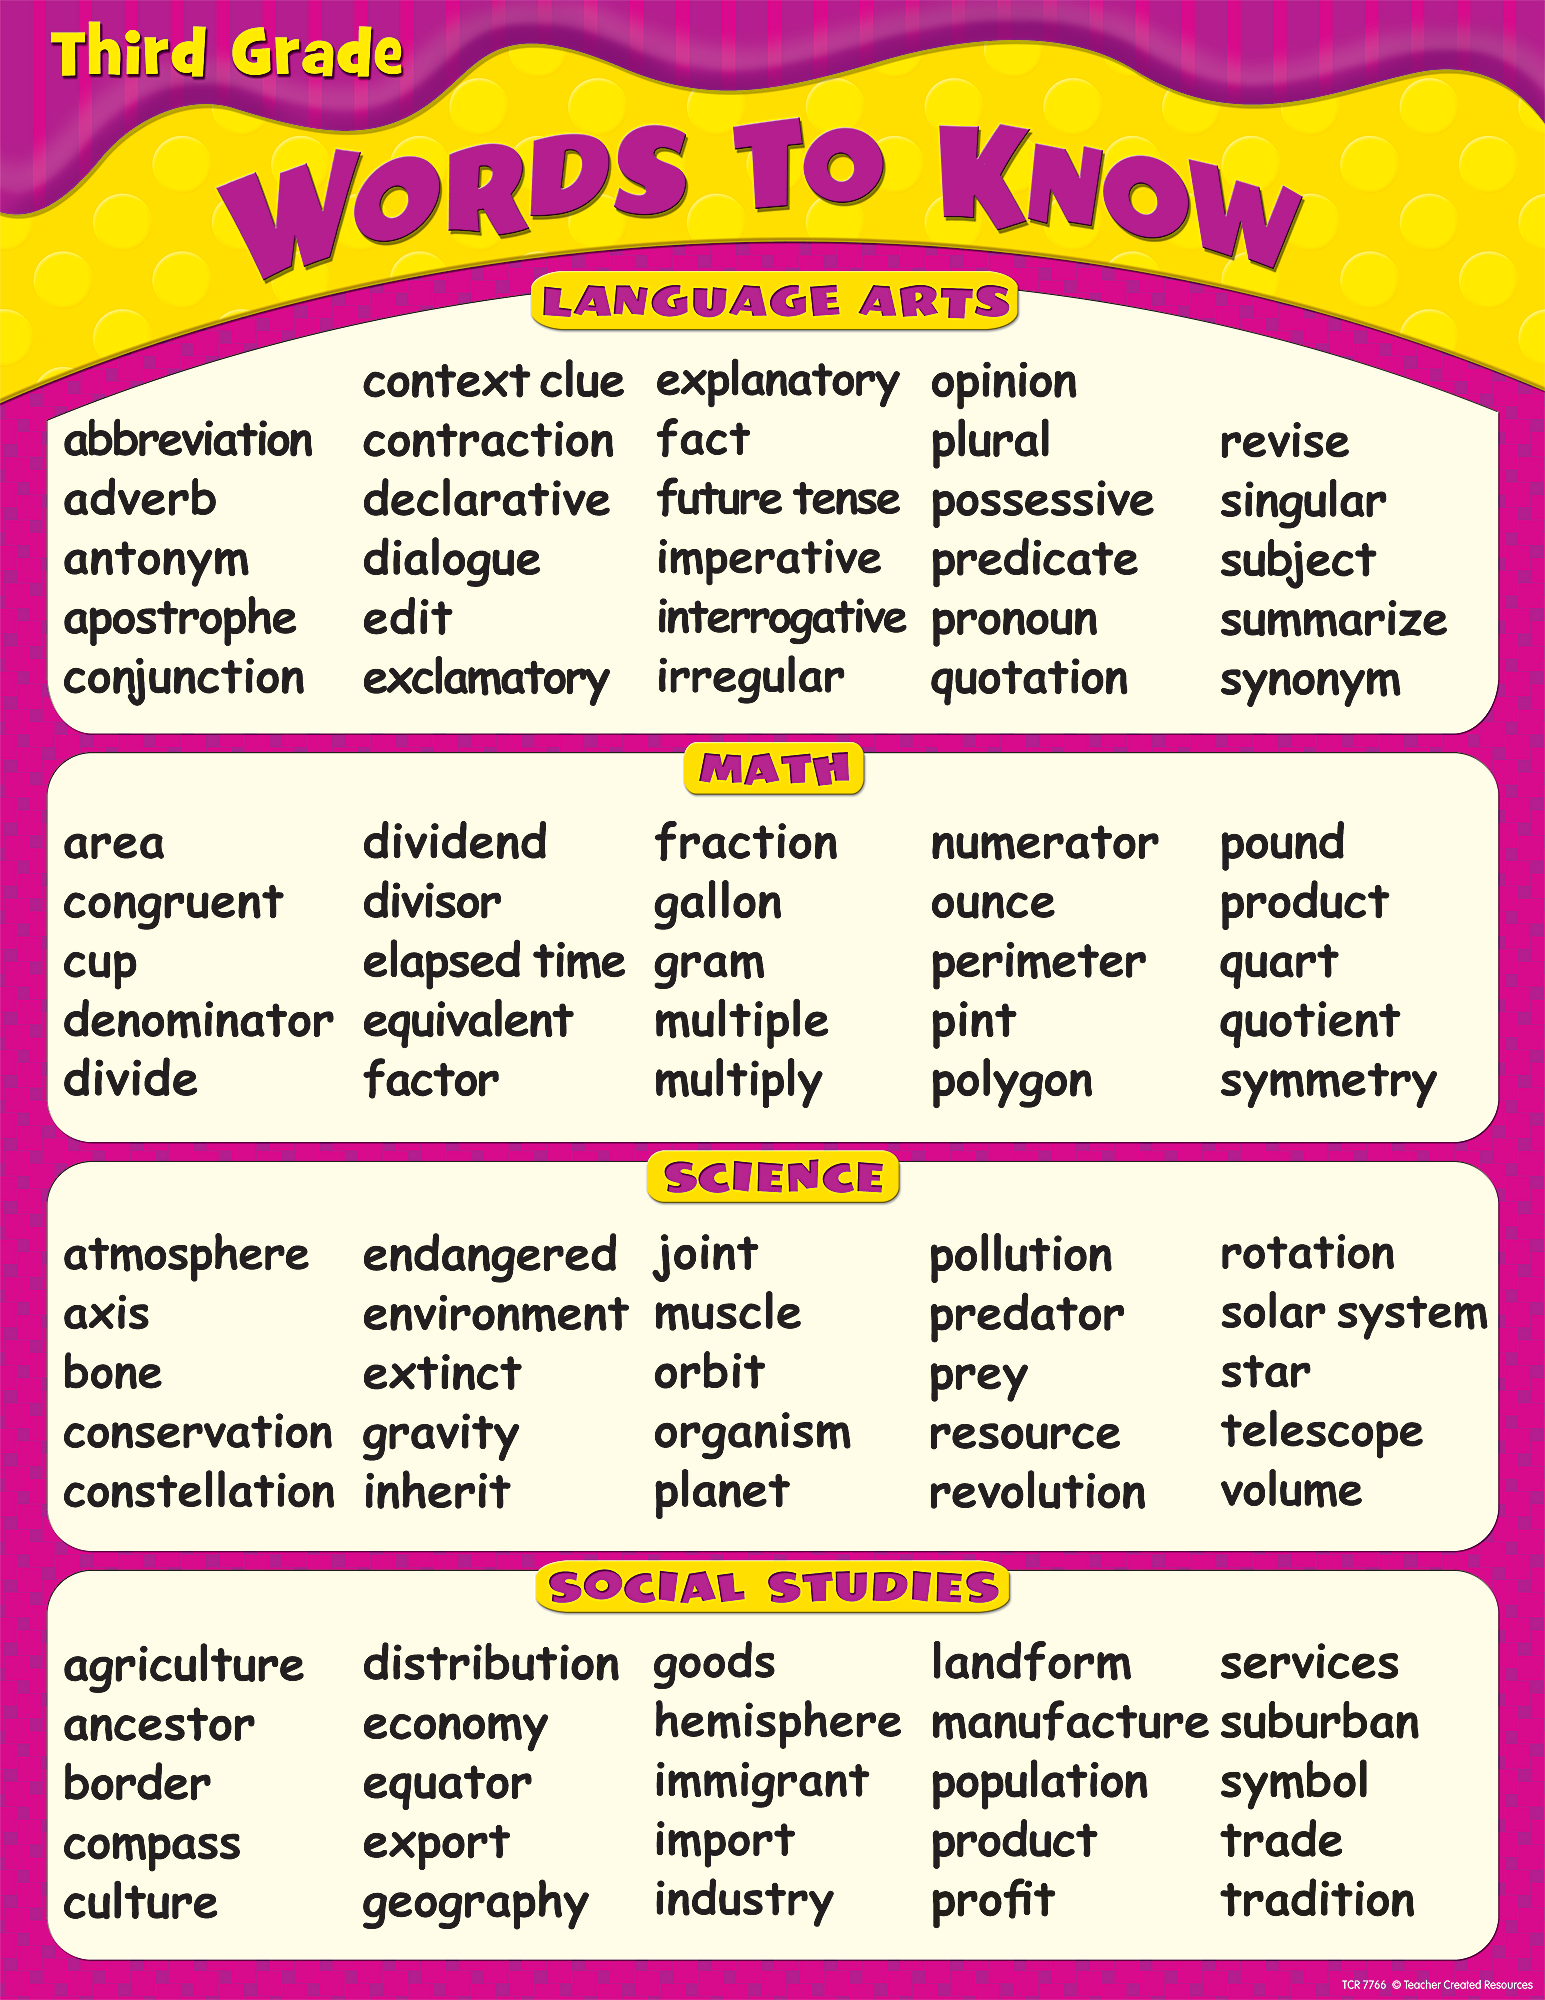 Words To Know in 3rd Grade Chart - TCR7766 | Teacher Created Resources